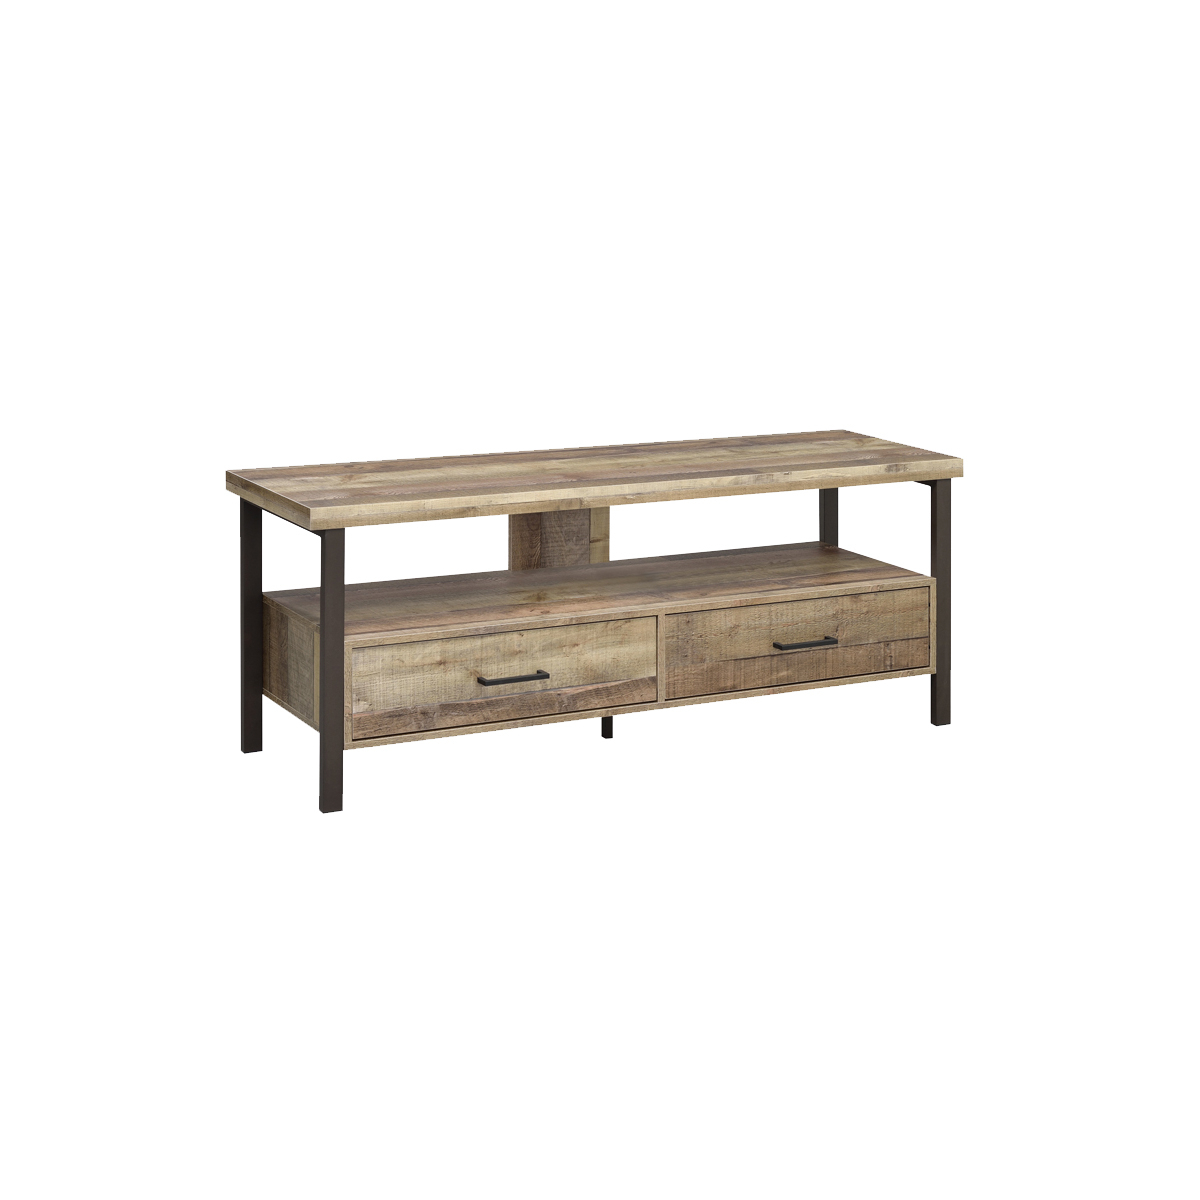 59 Inch Wooden TV Console With 2 Storage Drawers And Open Shelf, Brown- Saltoro Sherpi